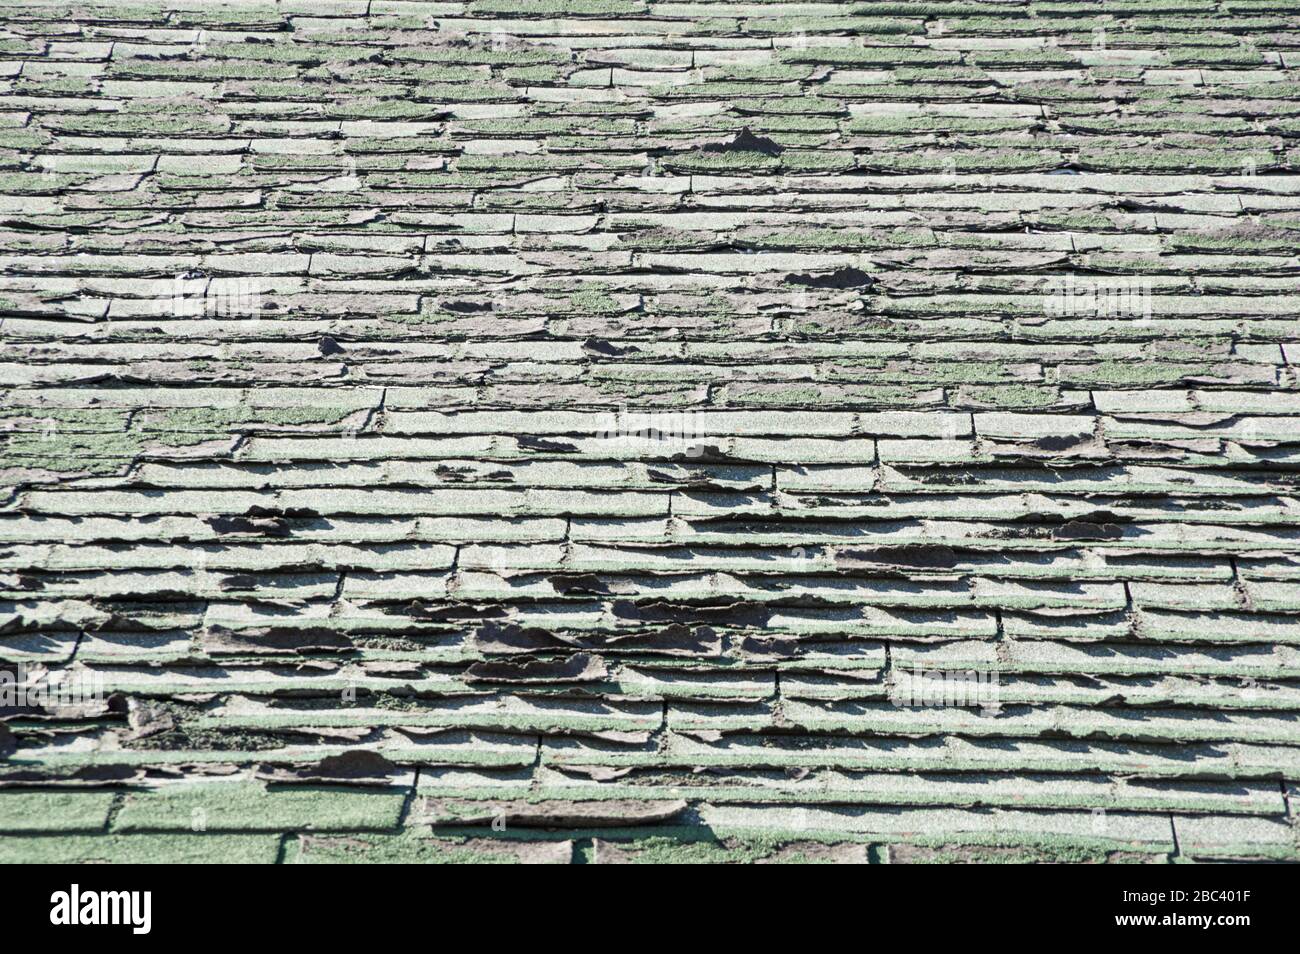 sun damaged old roof with peeling and curling composition shingles Stock Photo